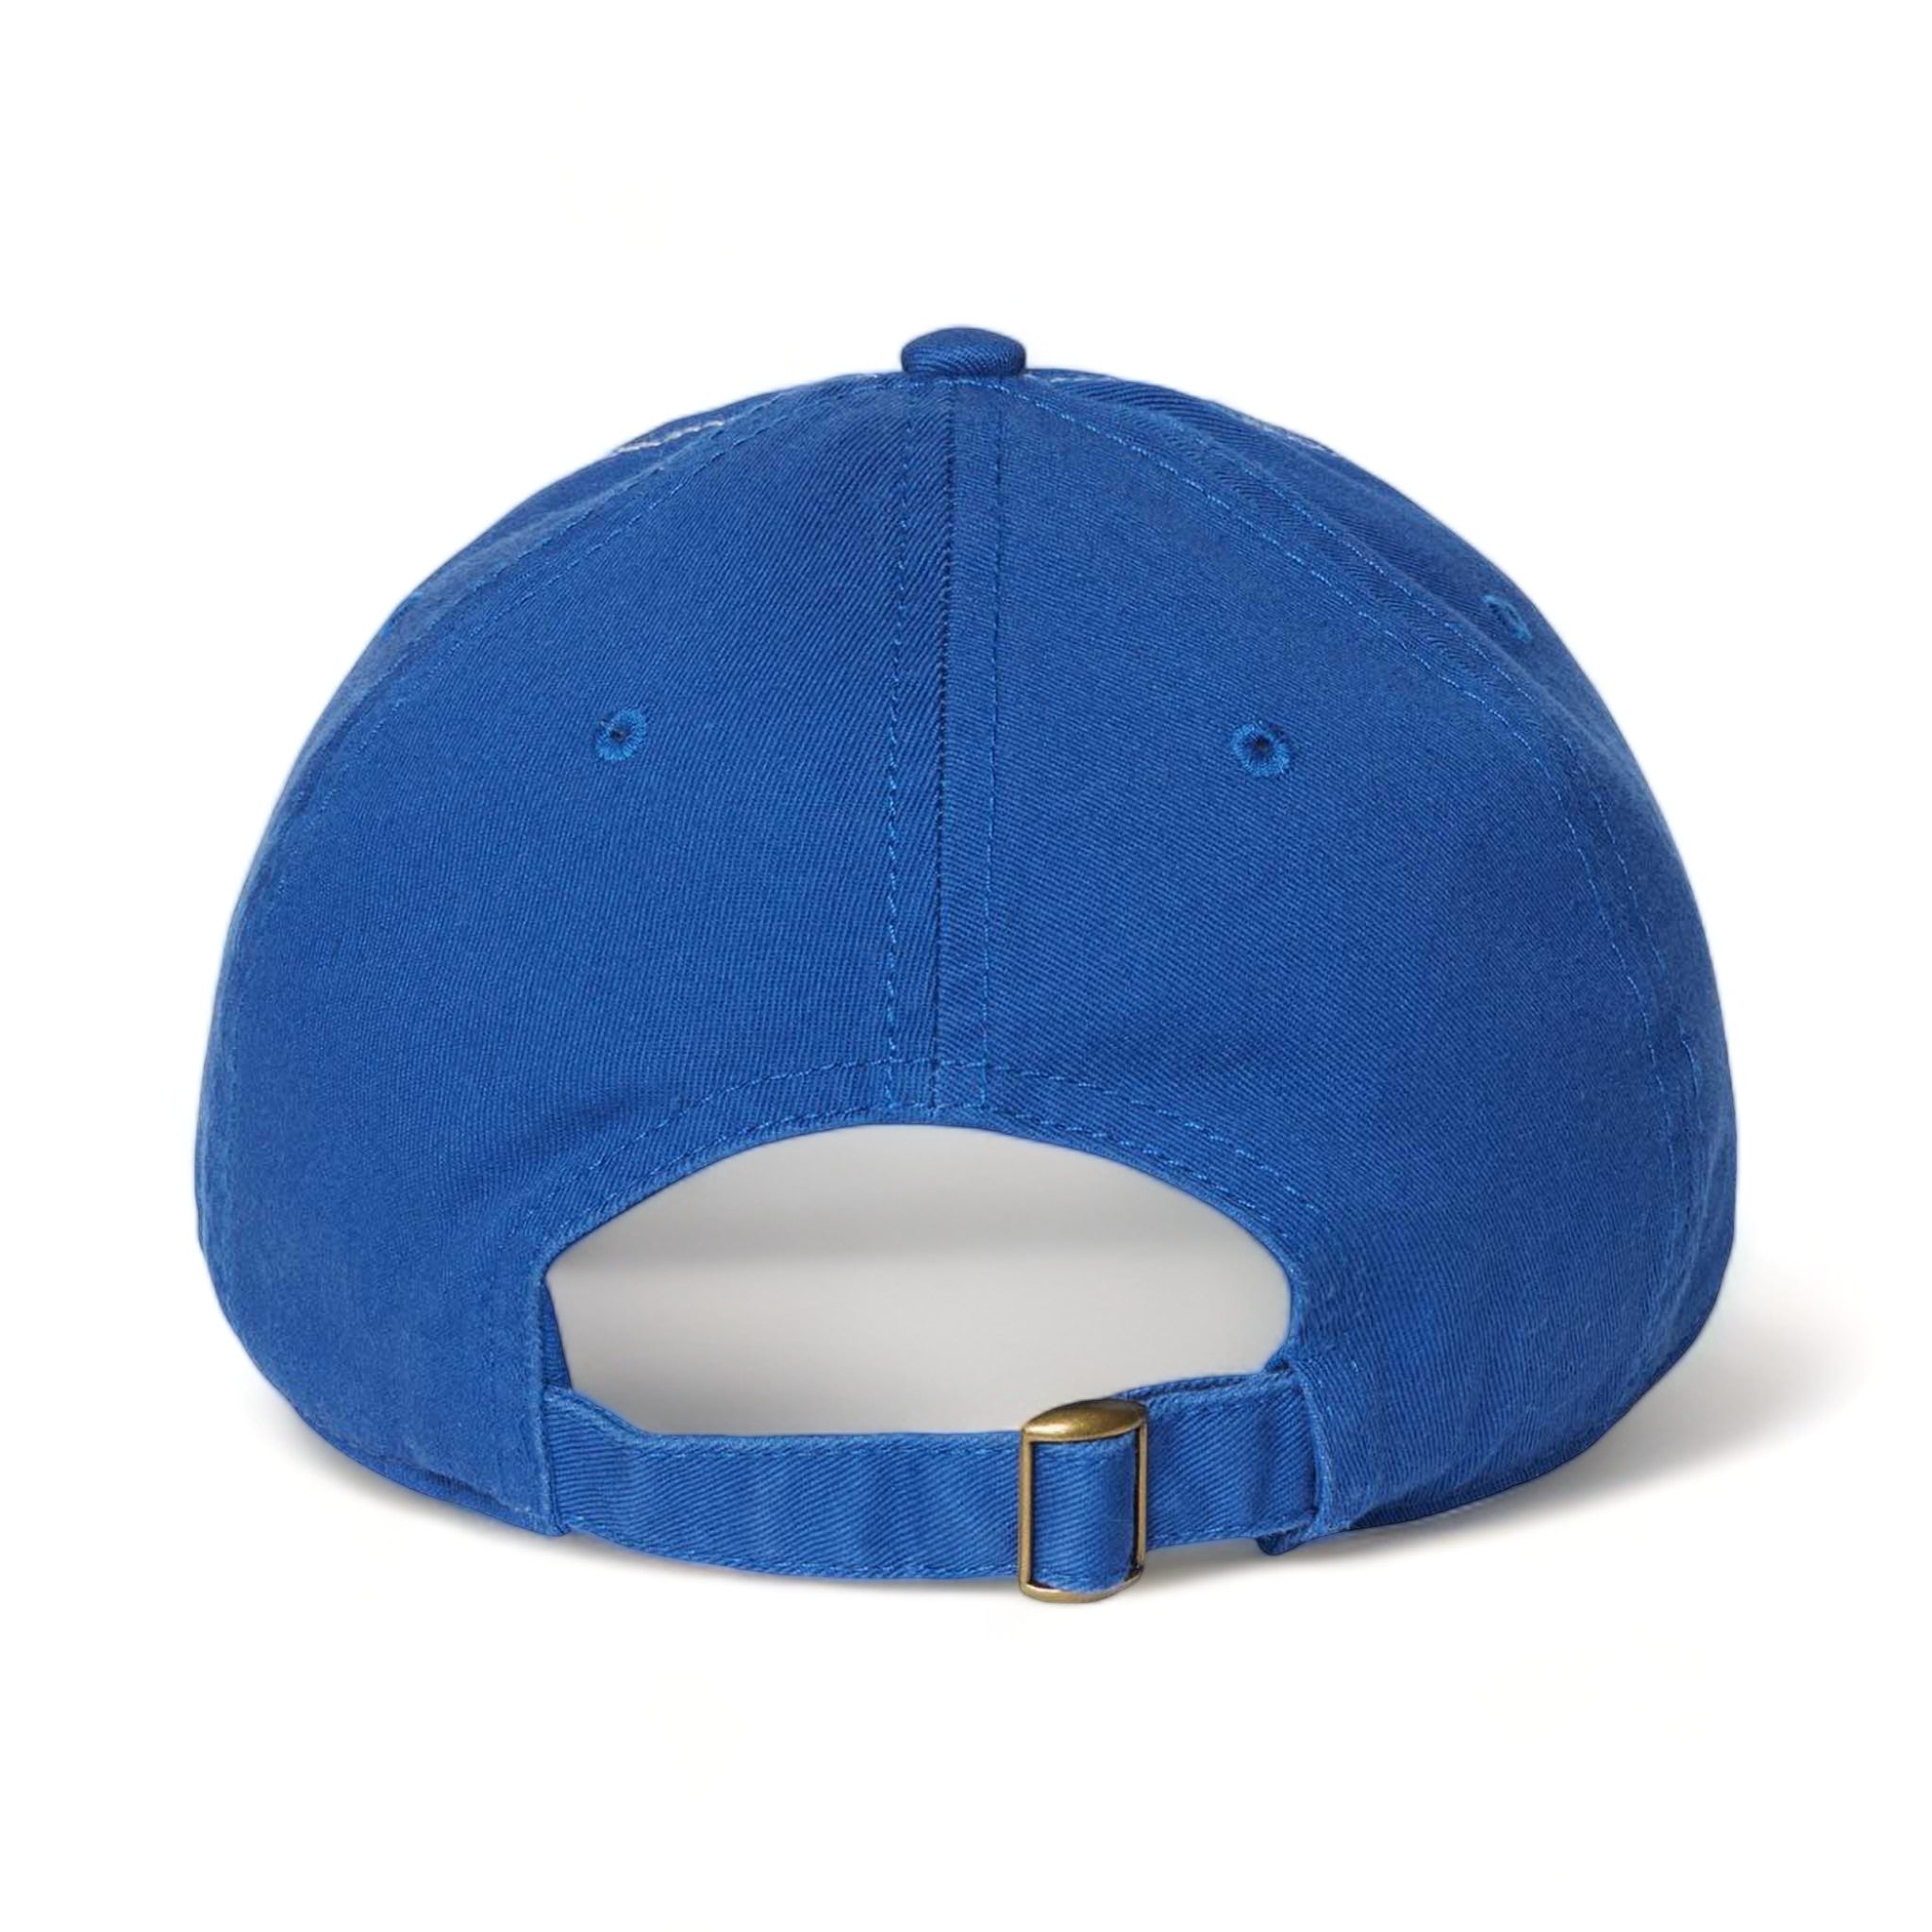 Back view of CAP AMERICA i1002 custom hat in white and royal